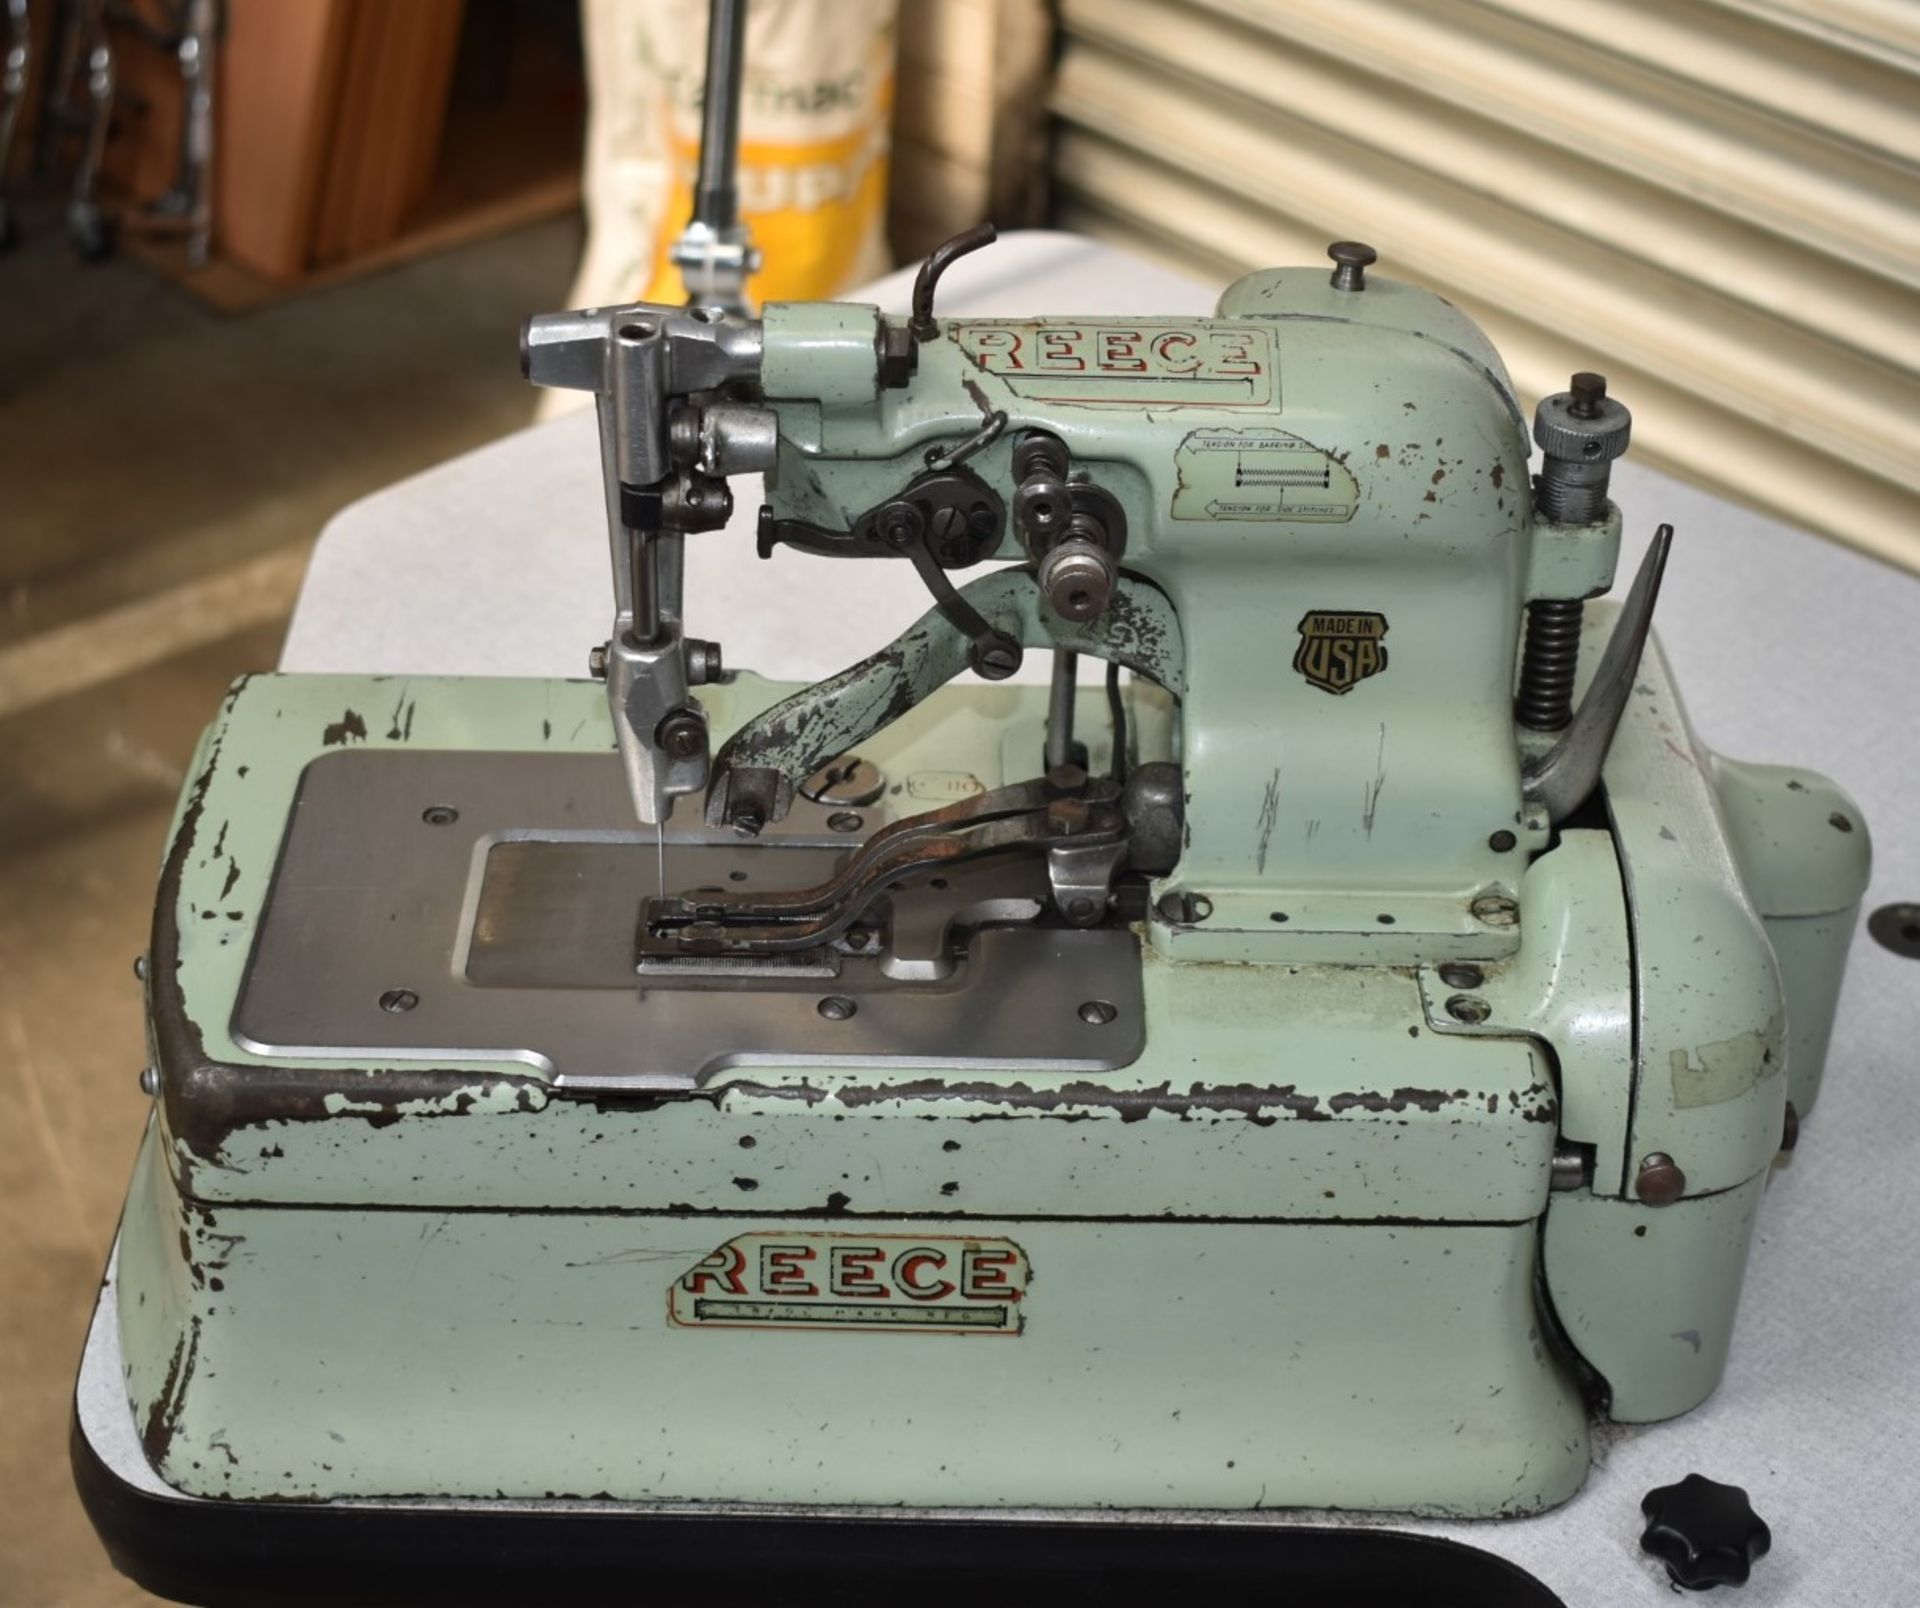 1 x Reece Industrial Label Tacker Sewing Machine - Model S2-TKF - Image 6 of 24